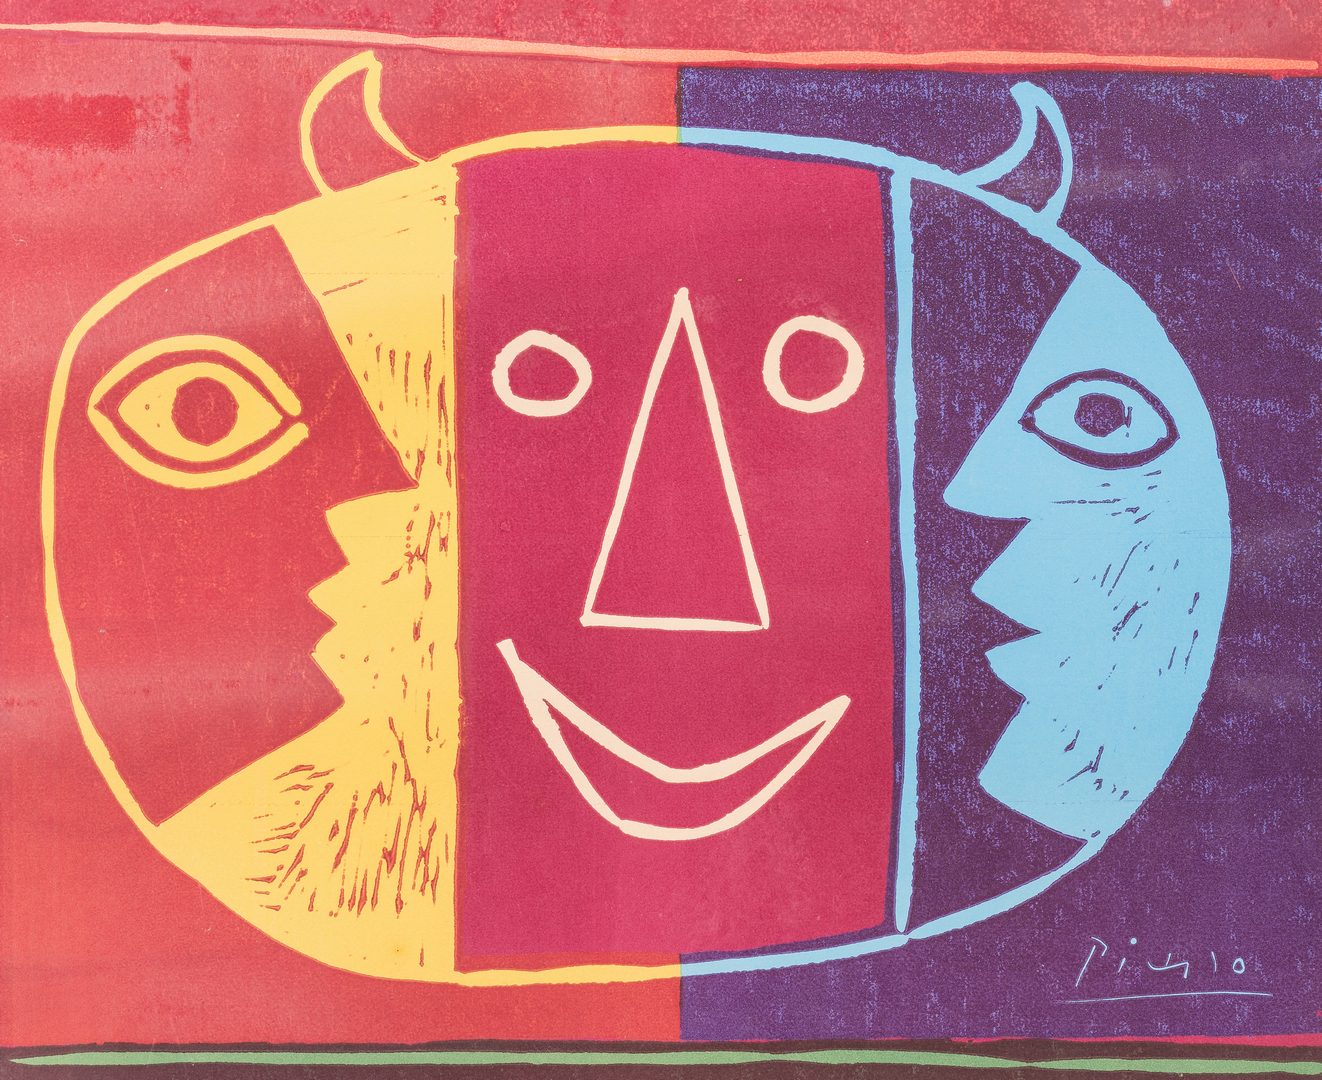 Lot 458: Picasso Signed Exhibition Poster